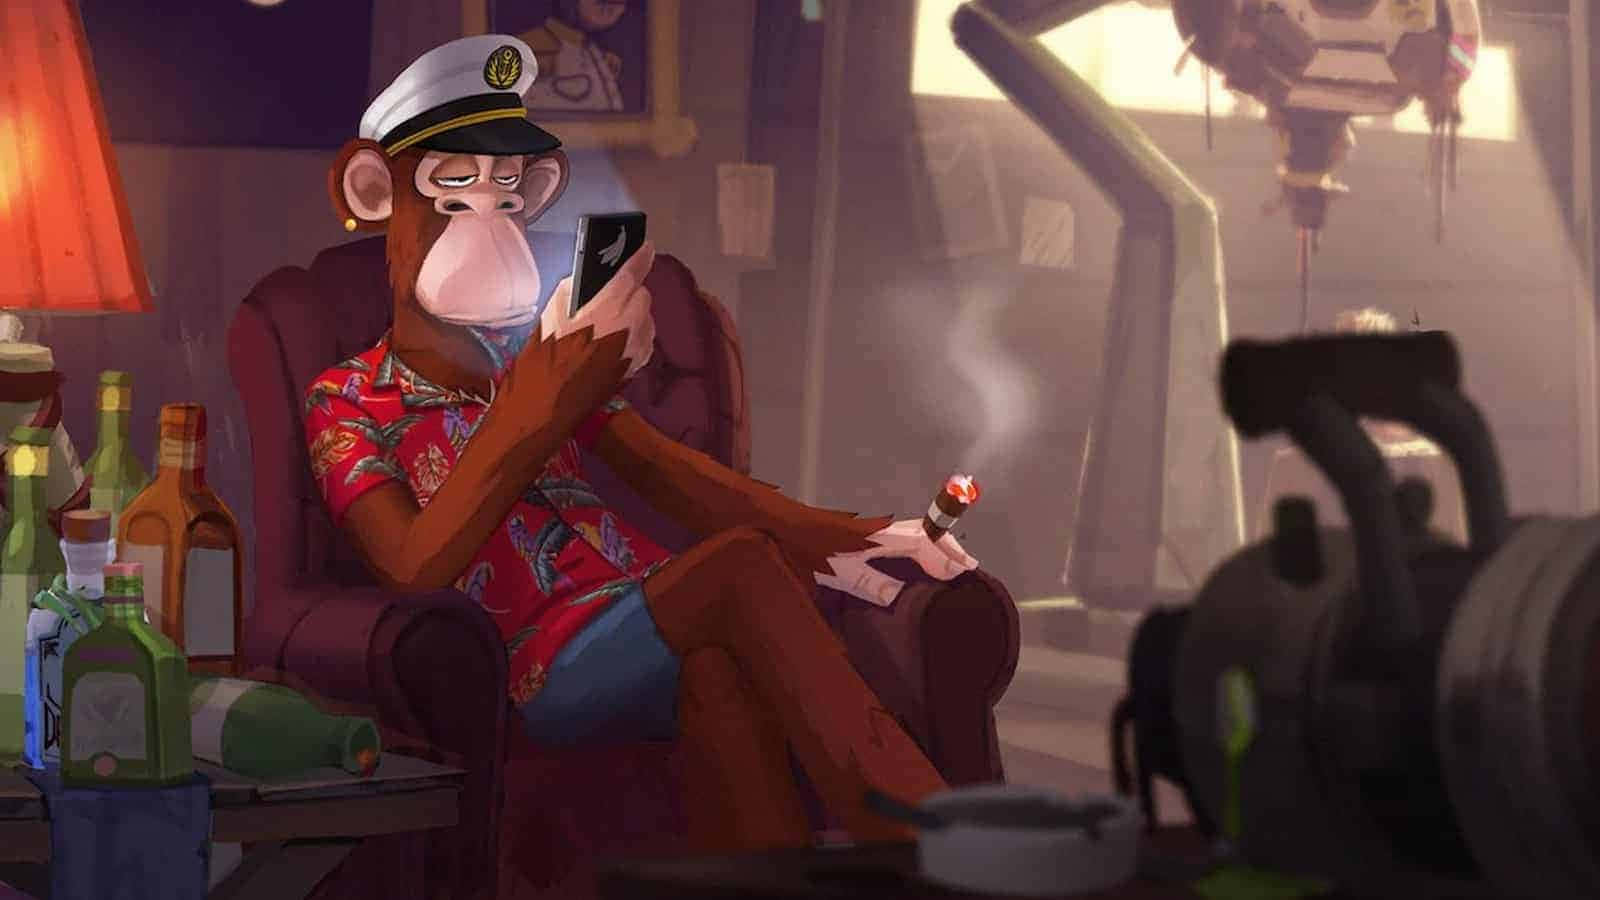 "Set sail with the Bored Ape Yacht Club!" Wallpaper